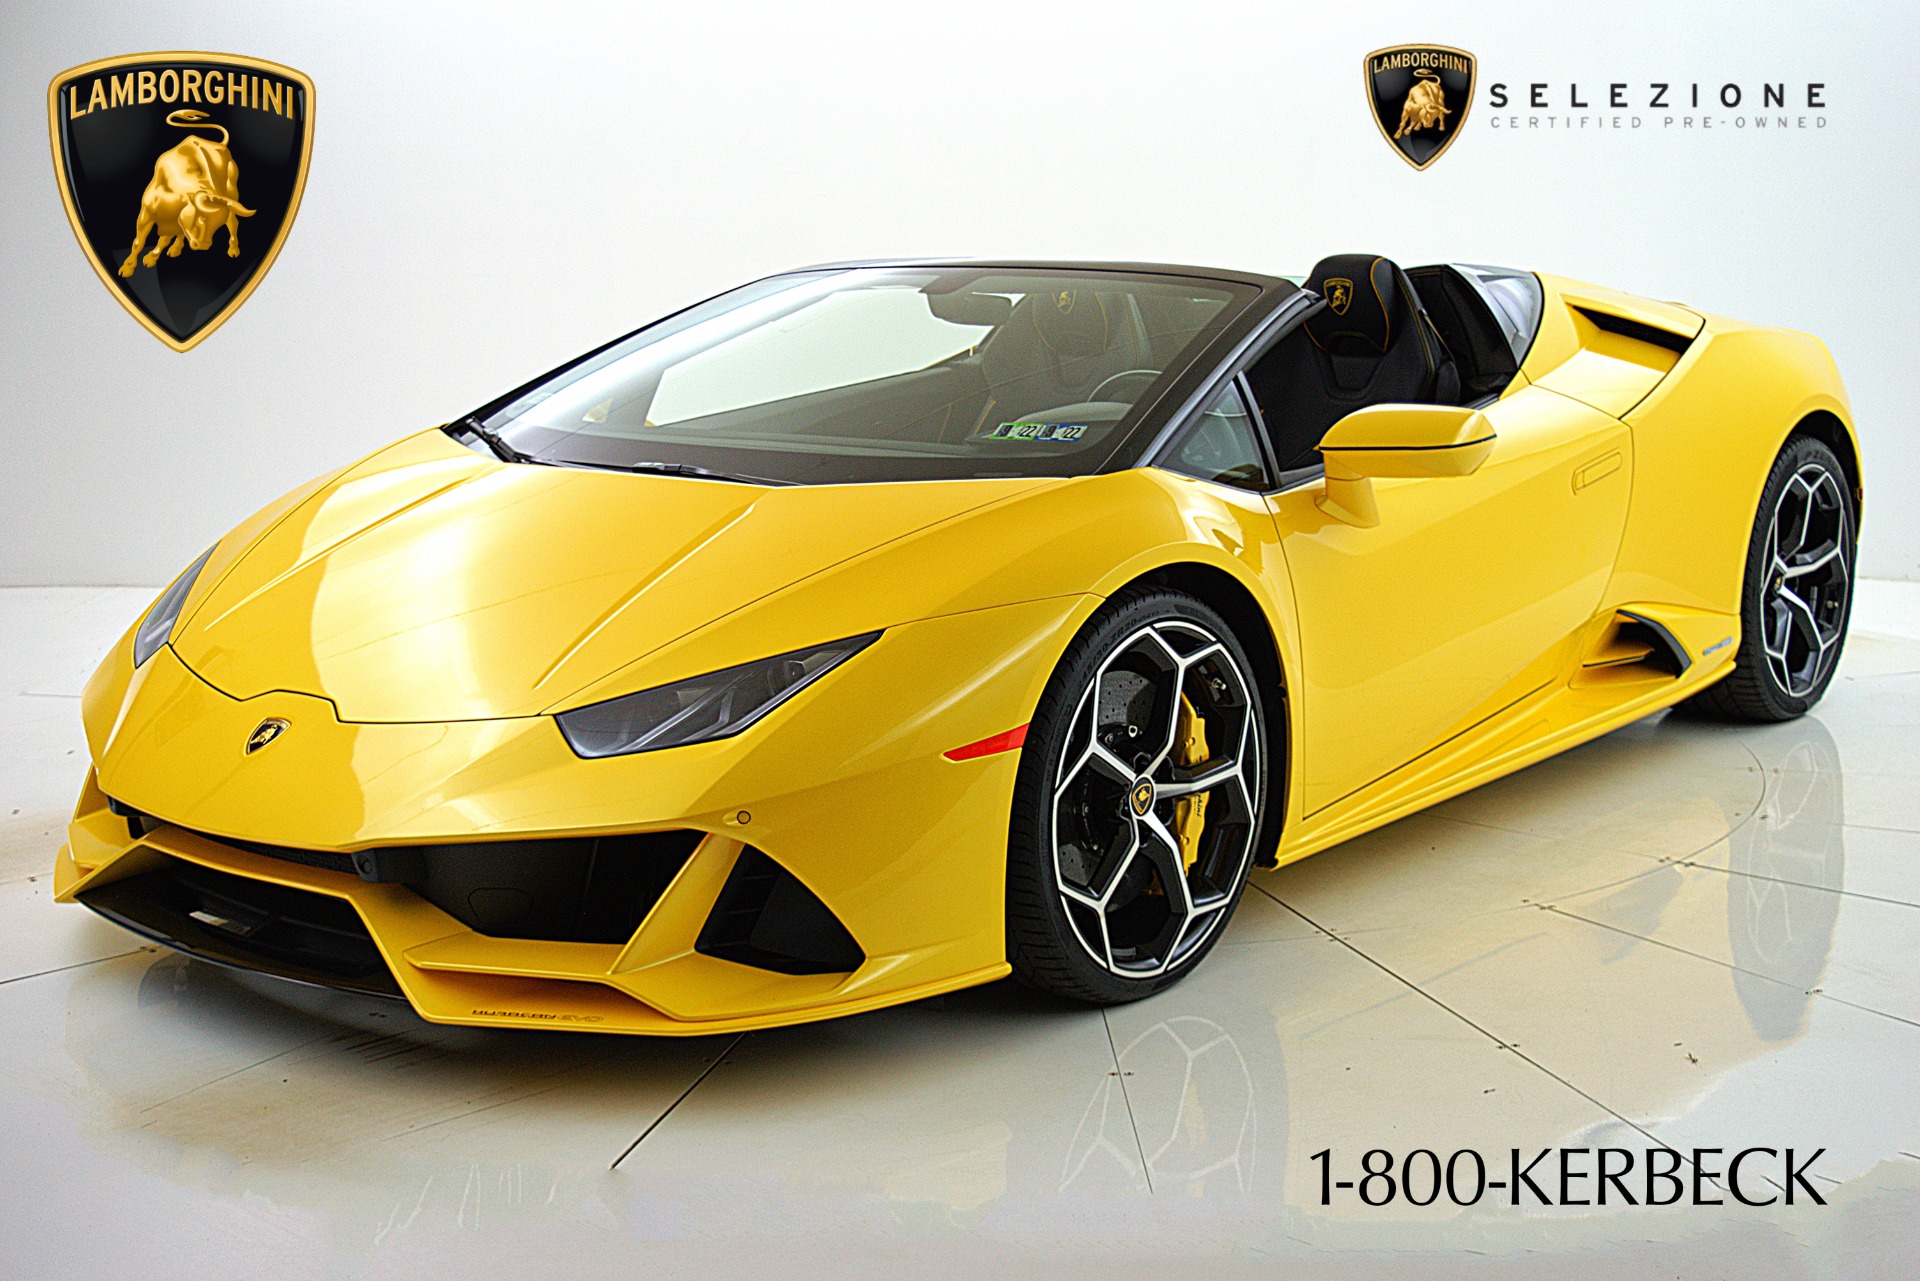 Used 2020 Lamborghini Huracan AWD LP 640-4 EVO Spyder / LEASE OPTIONS AVAILABLE for sale $349,000 at Bentley Palmyra N.J. in Palmyra NJ 08065 2